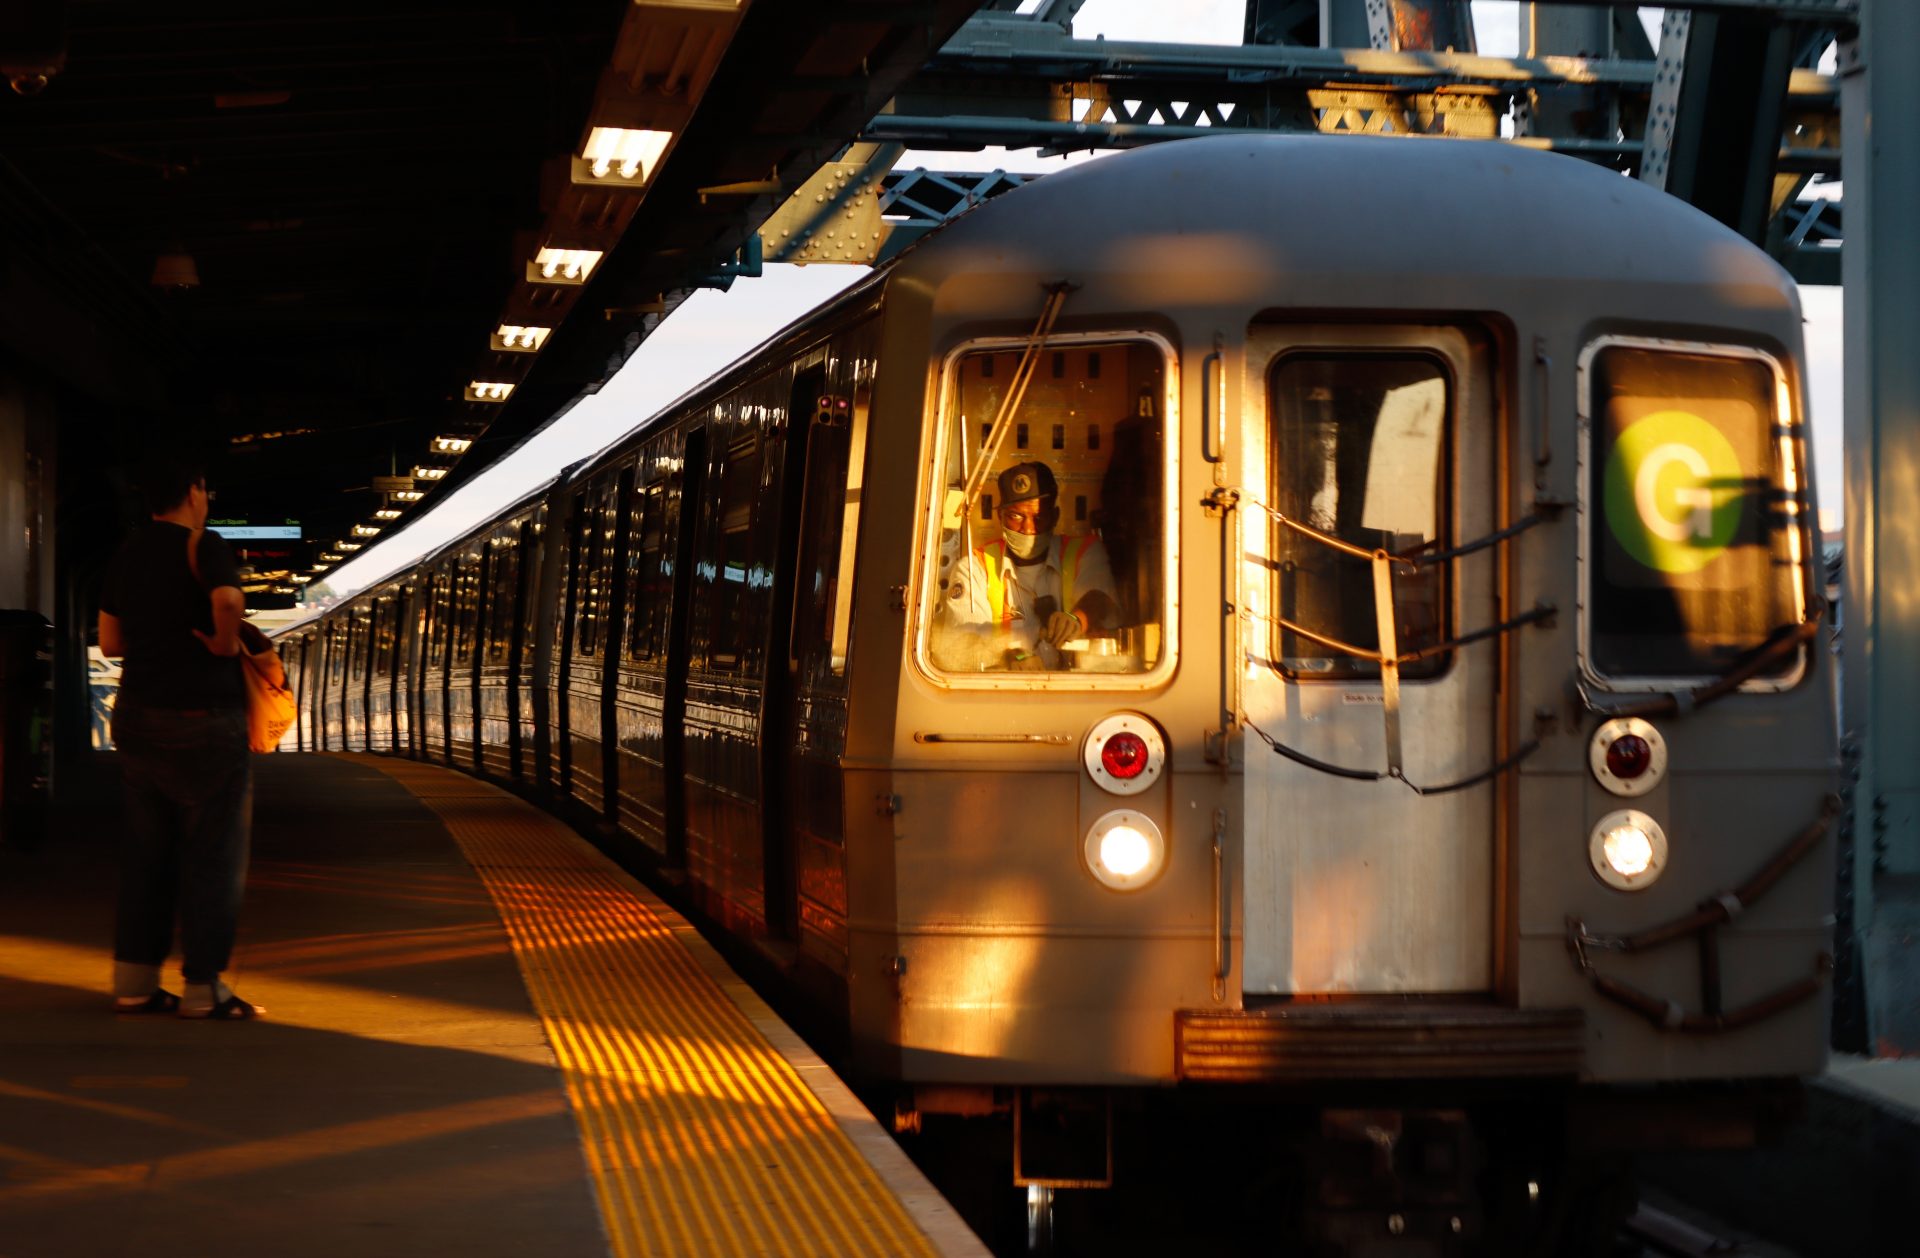 A energy surge shut down half of NYC’s subways for five hours